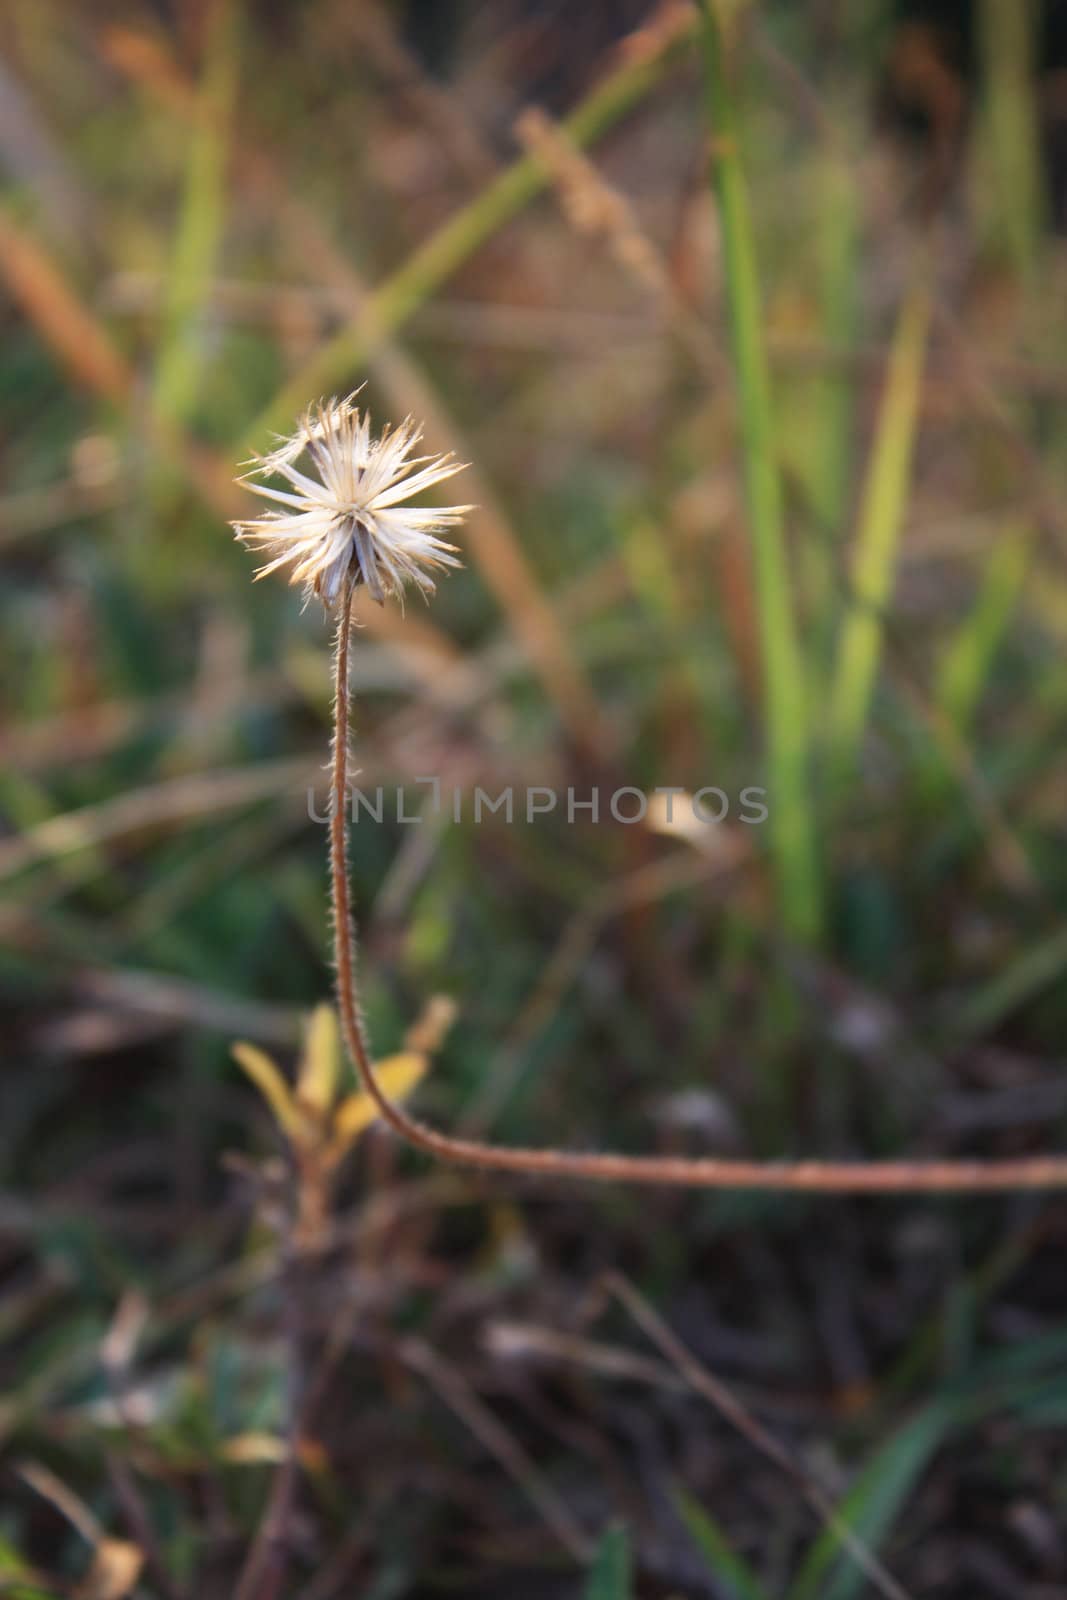 Small flower in nature which can be use as design background.